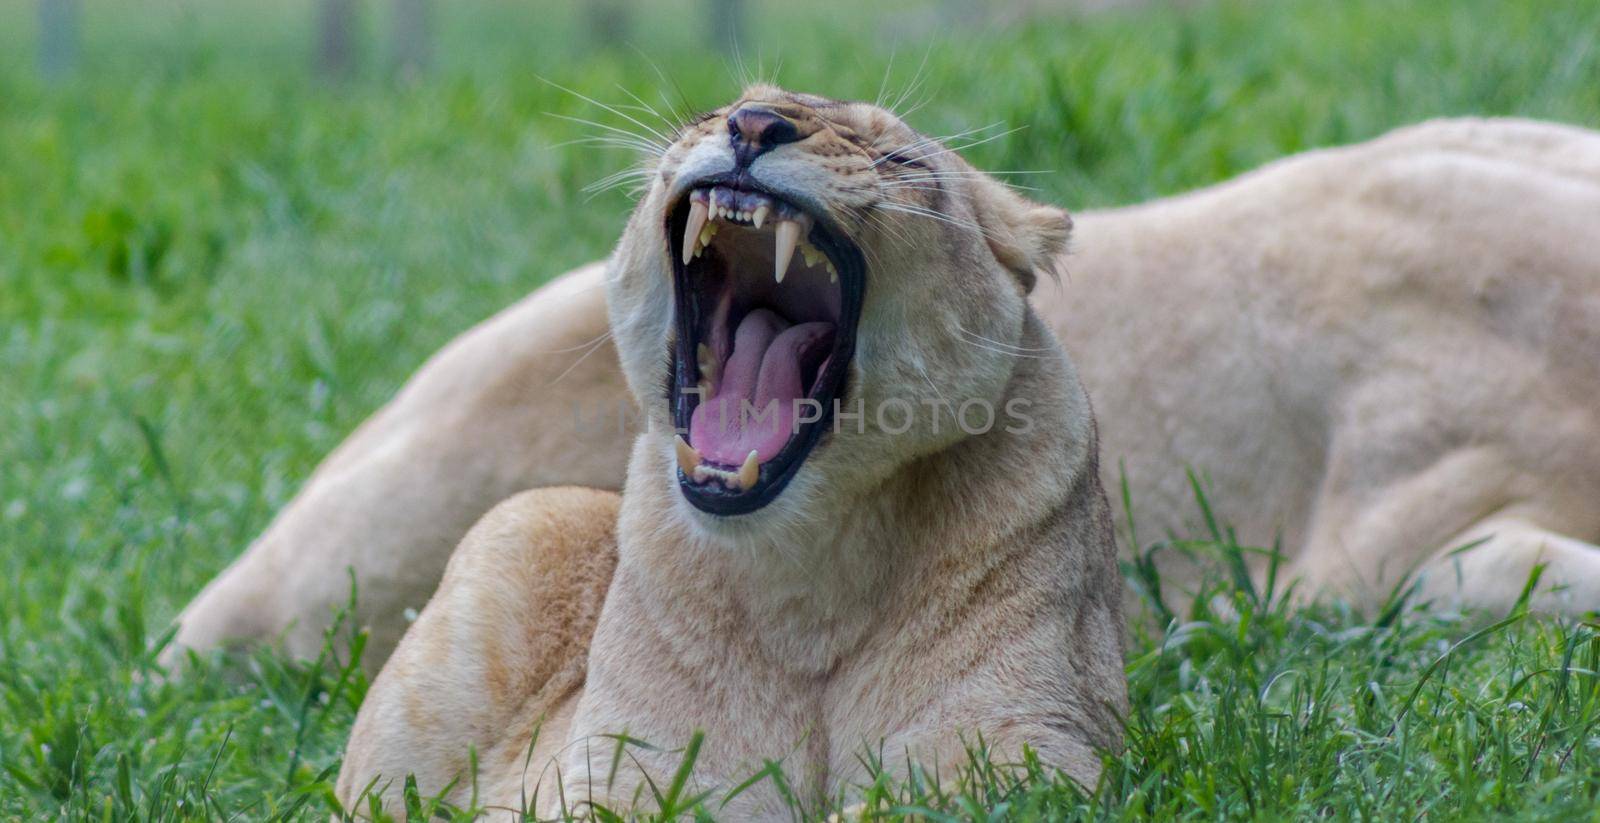 Female lion yawning in an Zoo, Australia by bettercallcurry